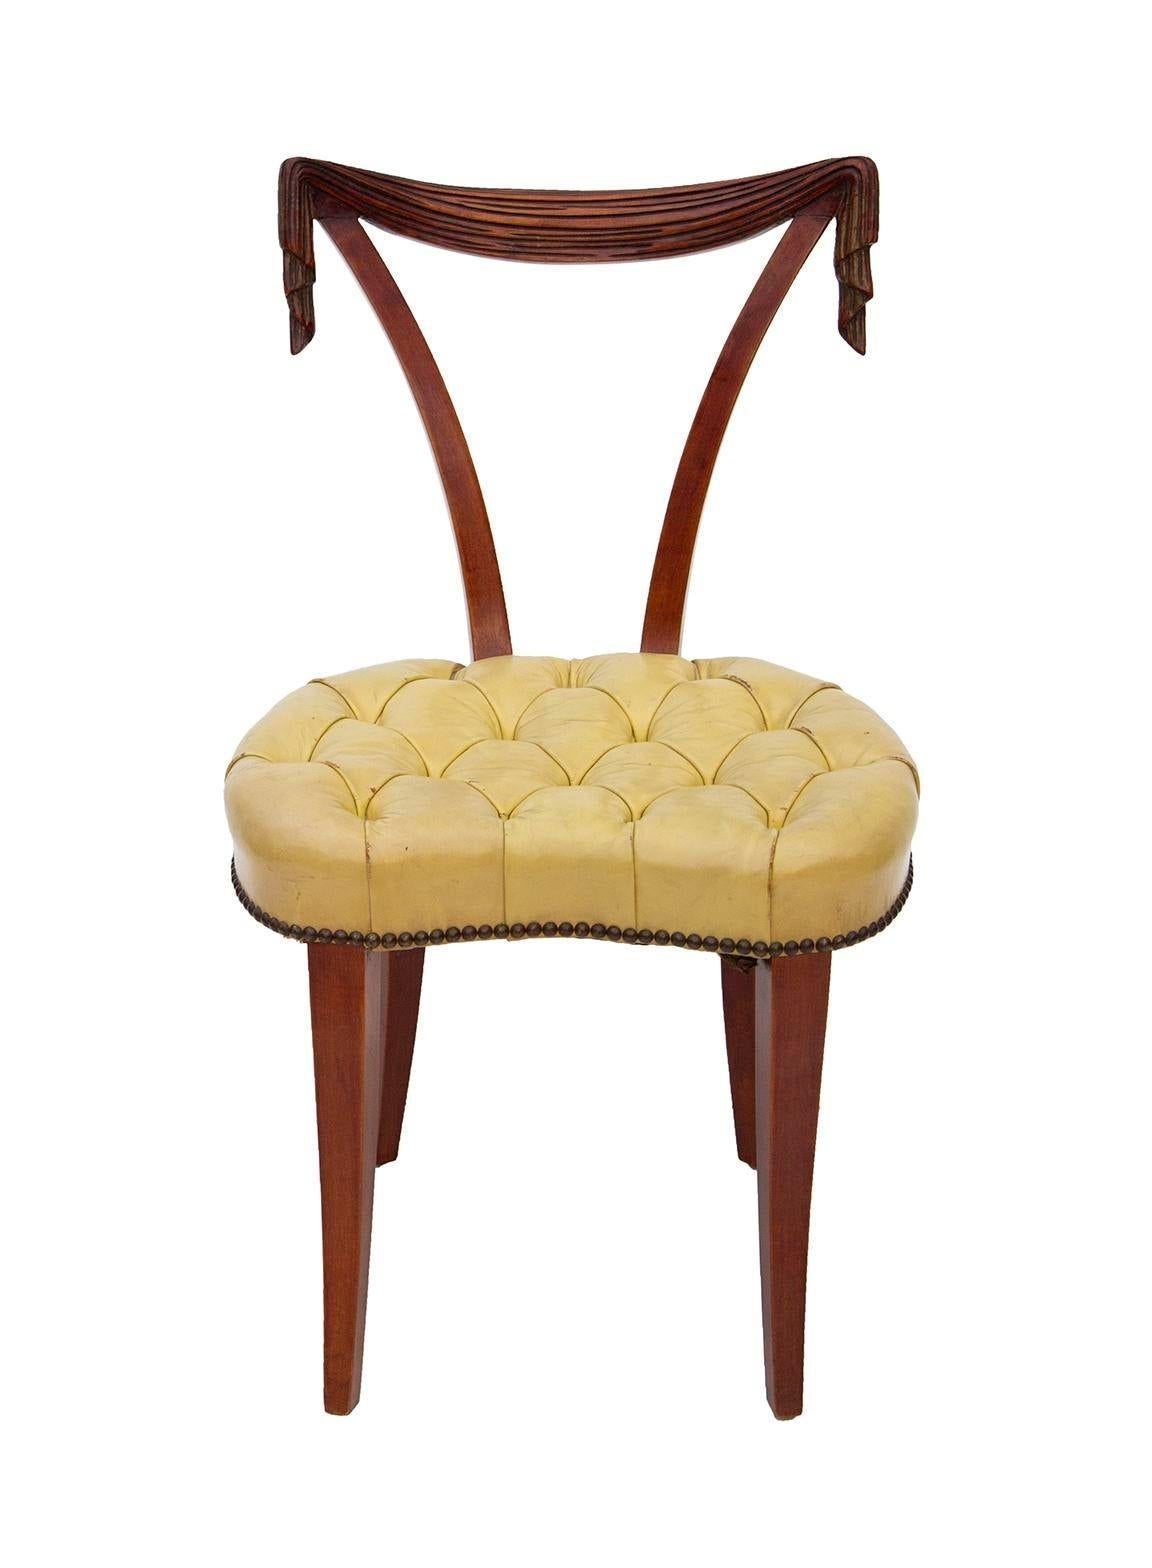 USA, 1940s
Hollywood Regency swag back or 'draped' occasional chair by Grosfeld House, circa 1940s. Tufted pale yellow leather seat and natural mahogany finish. Classic form that could add beauty to a variety of settings. This would be a beautiful